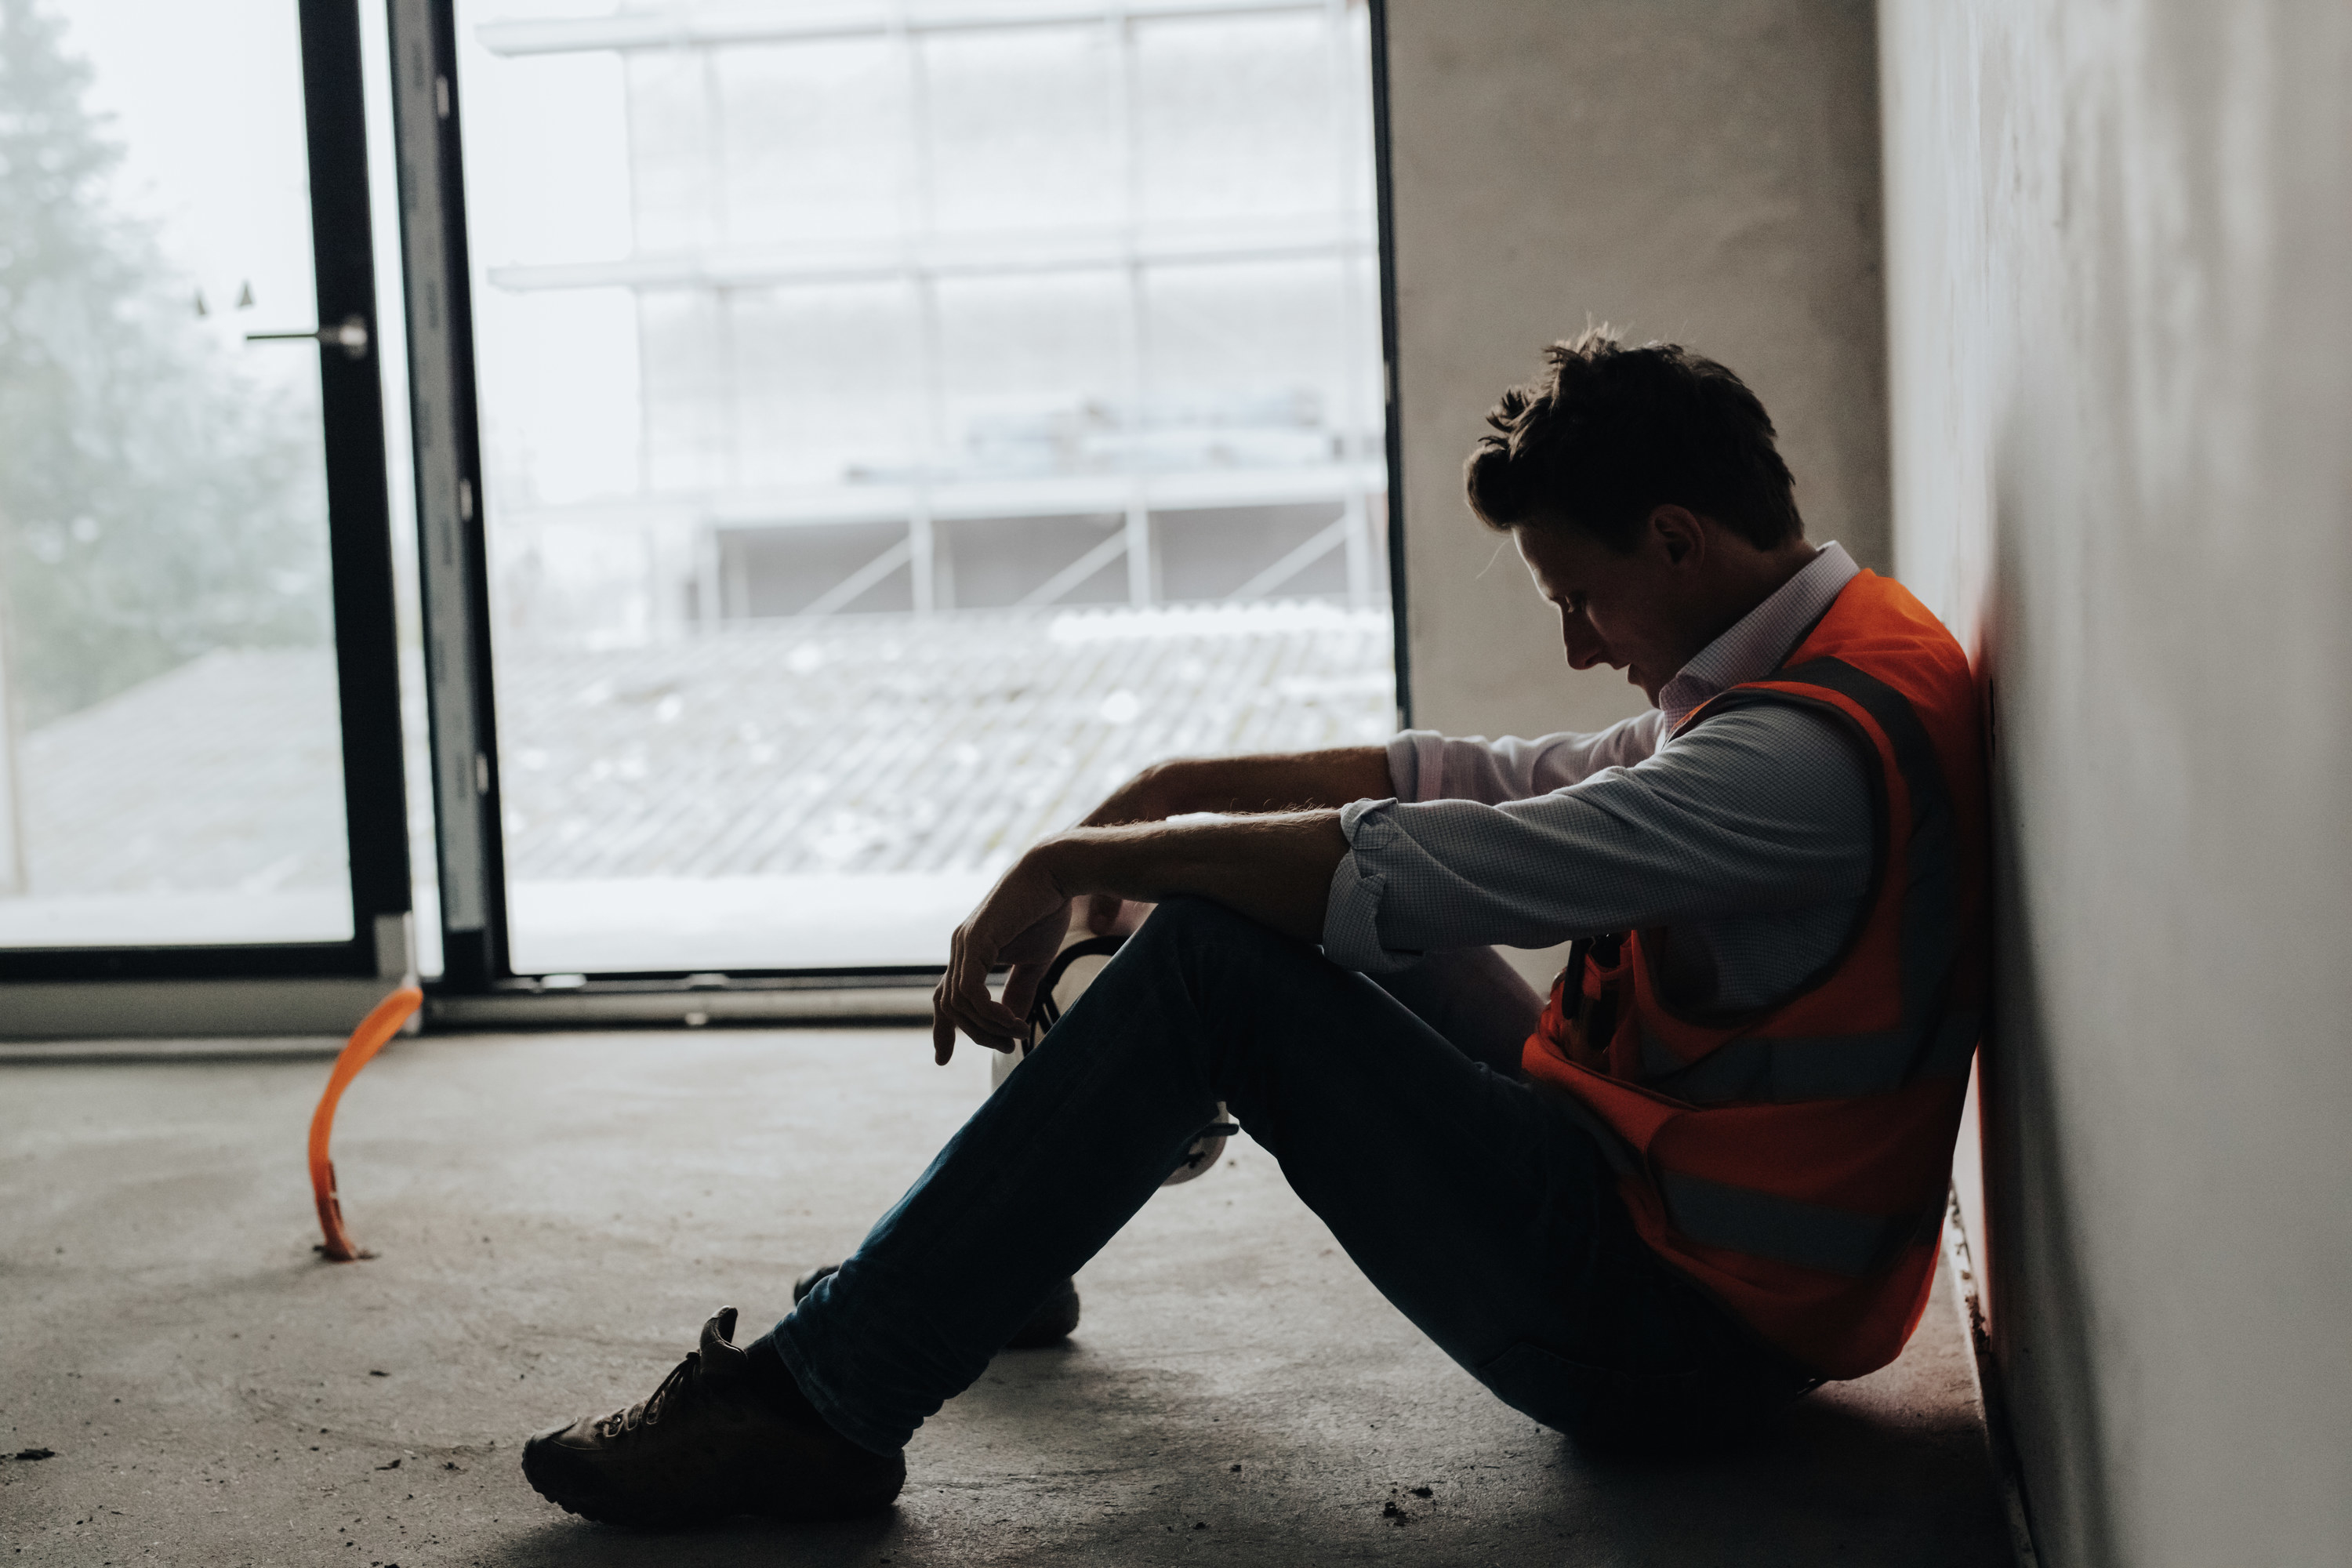 A man sitting on the floor at work and looking depressed